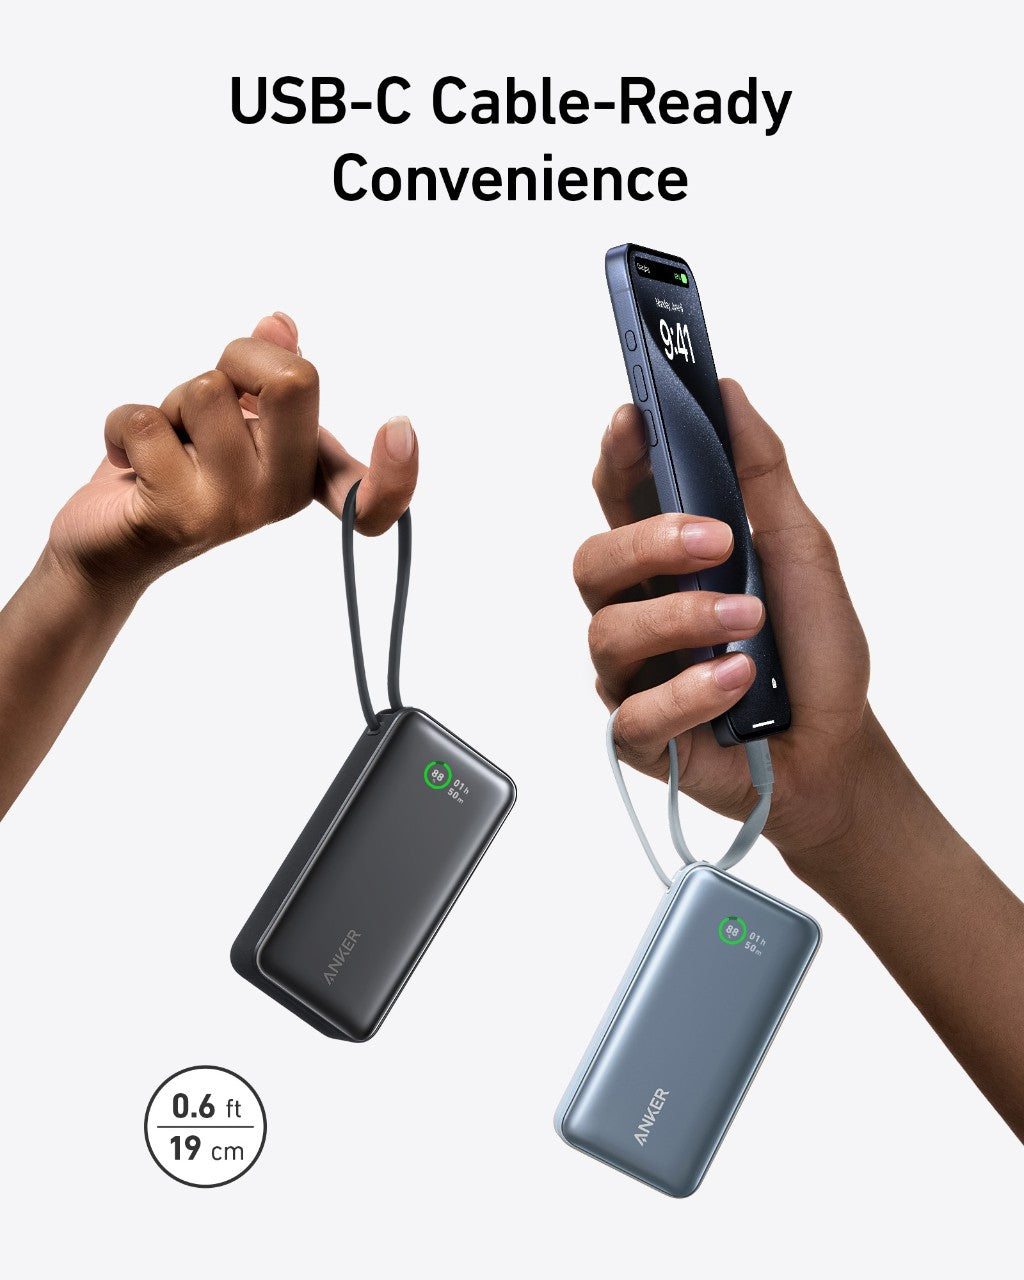 The Nano Power Bank 30W by Anker has a built-in USB-C cable